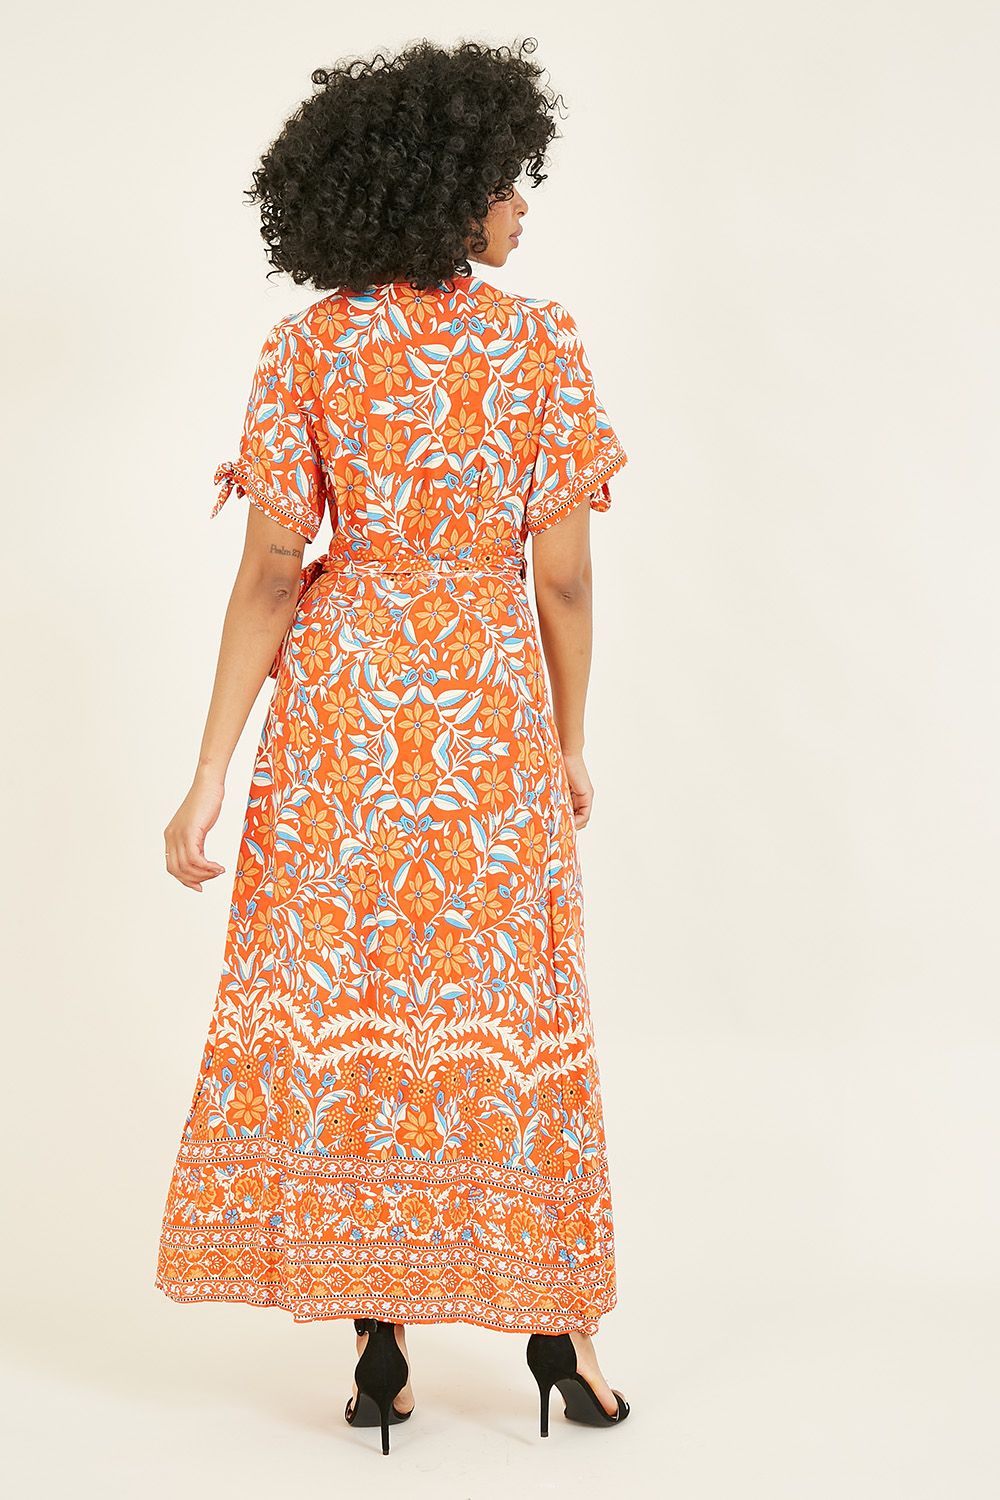 Sunny days call for bright and bold prints and this yumi orange floral printed dress certainly delivers. With a wrap style v neck, this dress pulls you in at the waist and features button up sleeves.  crafted with the sun in mind, stay cool is this lightweight, breathable fit.